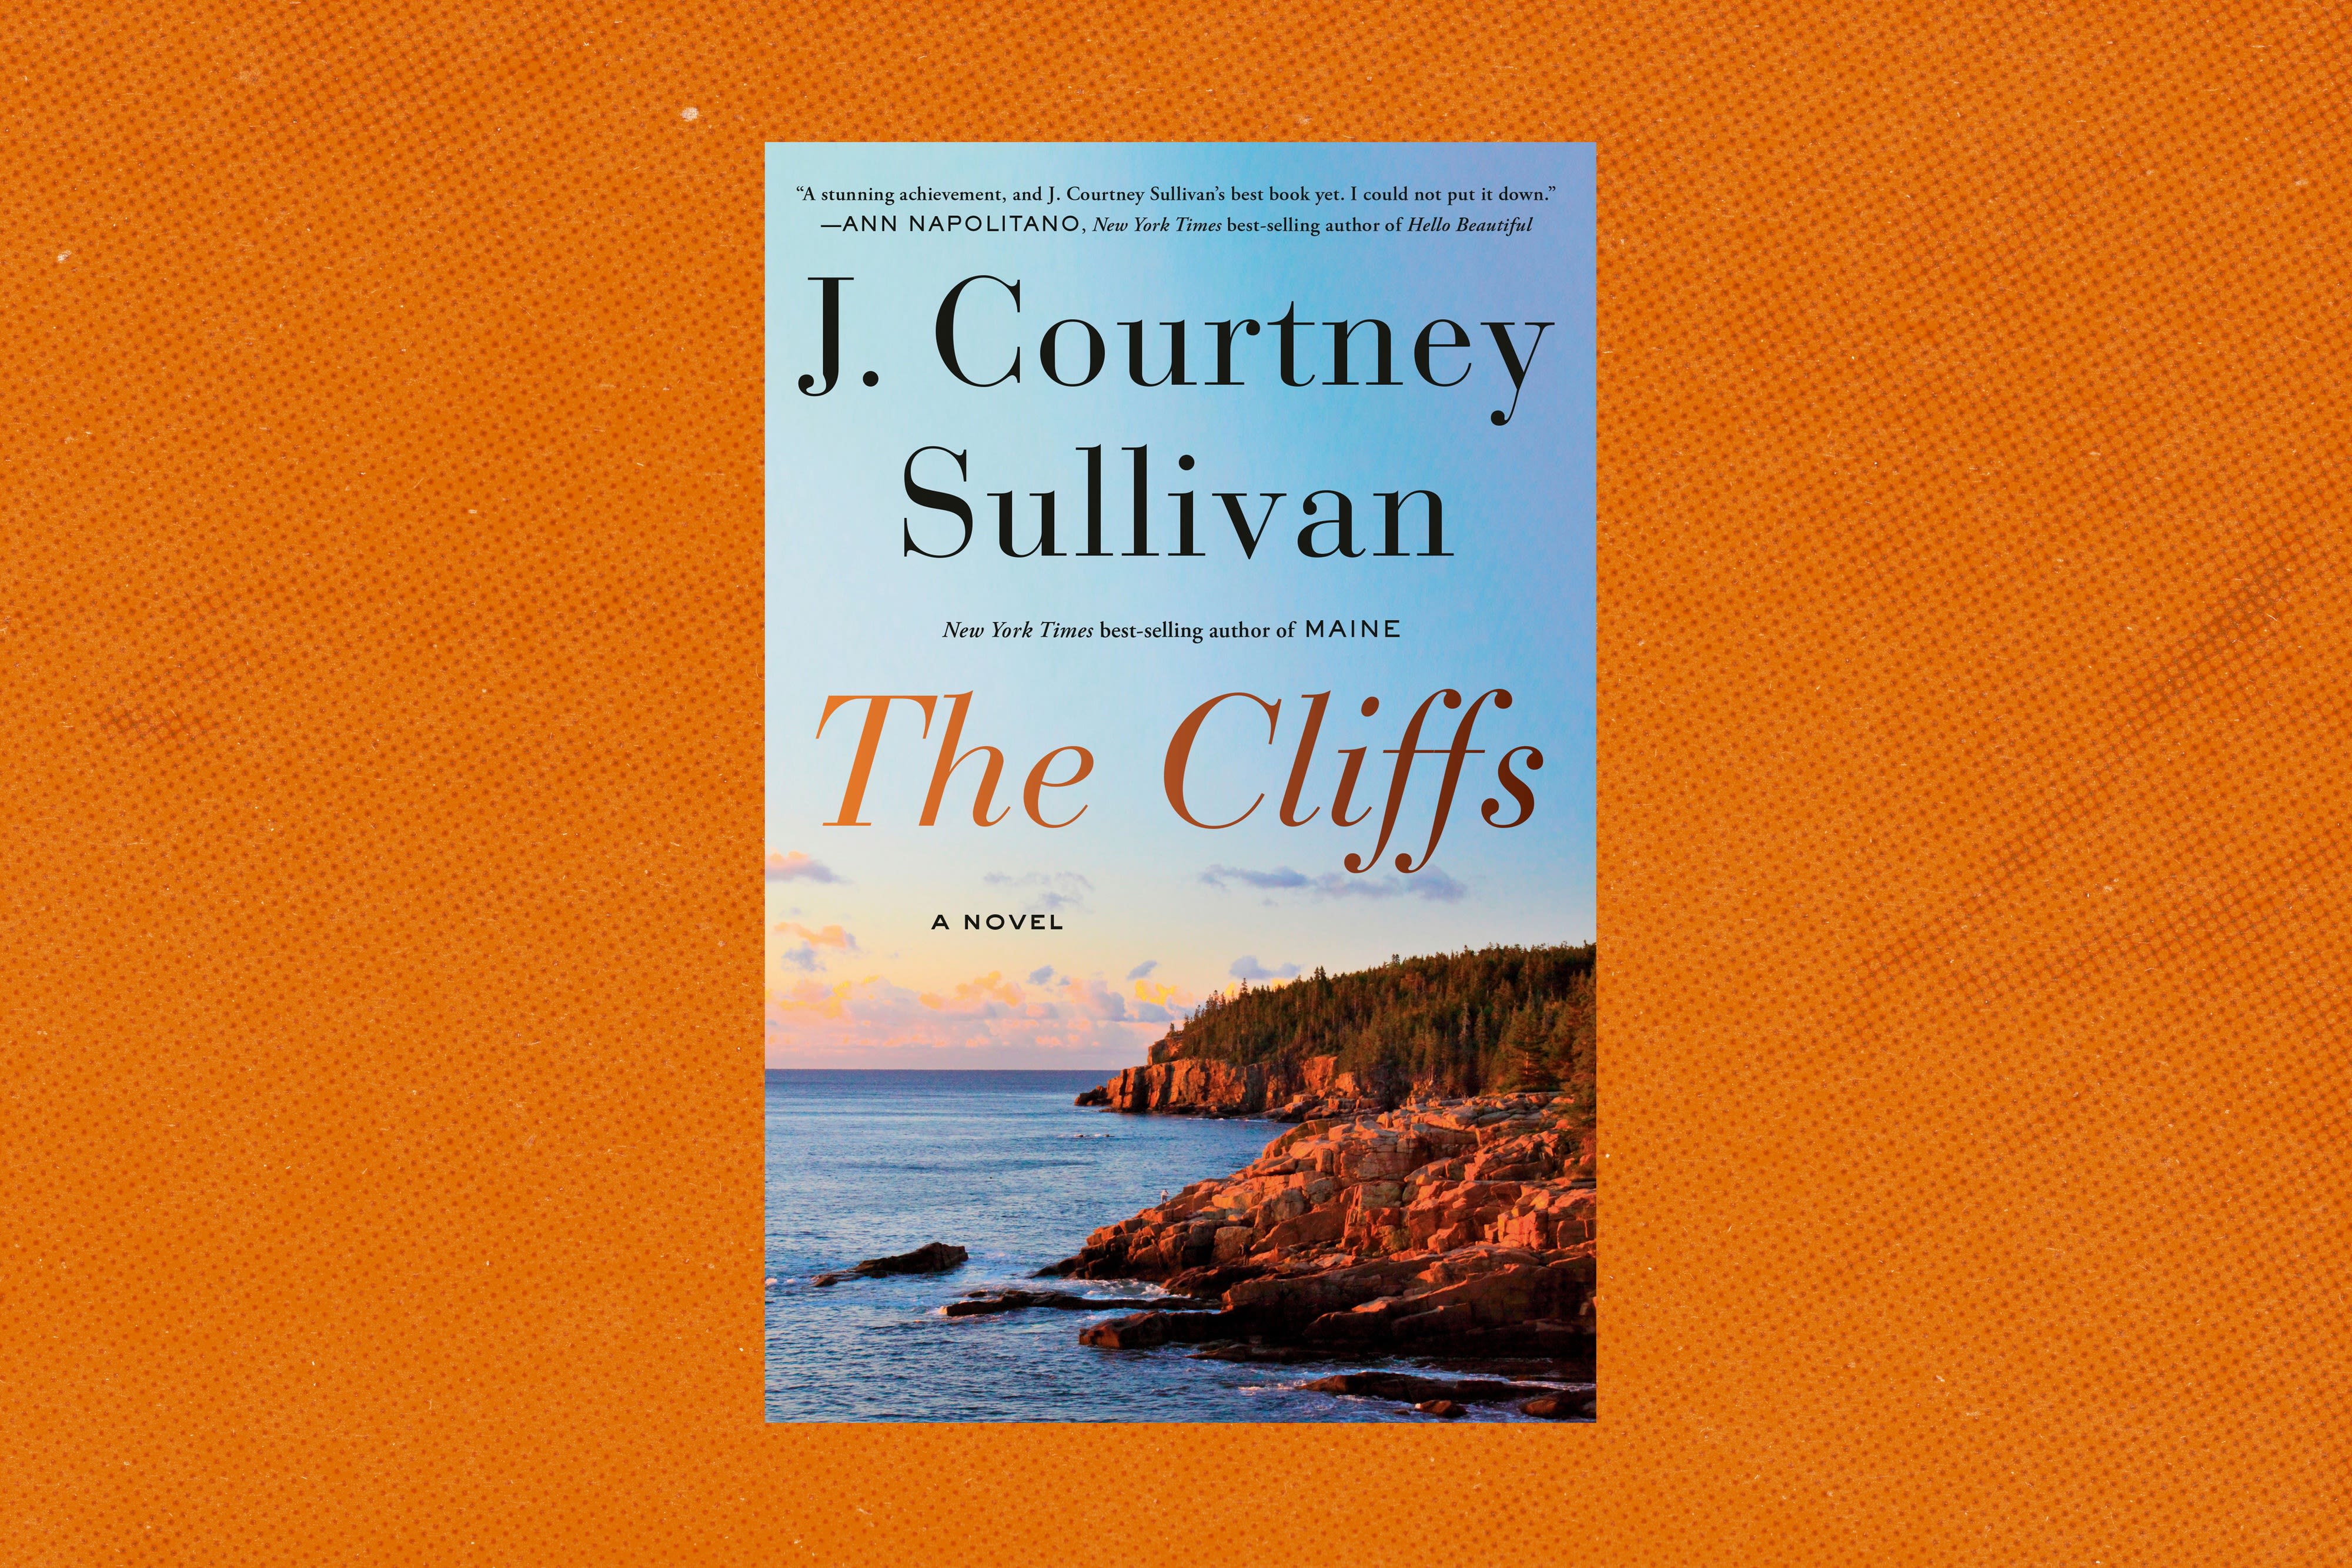 Review | J. Courtney Sullivan returns with ‘The Cliffs,’ ghosts included